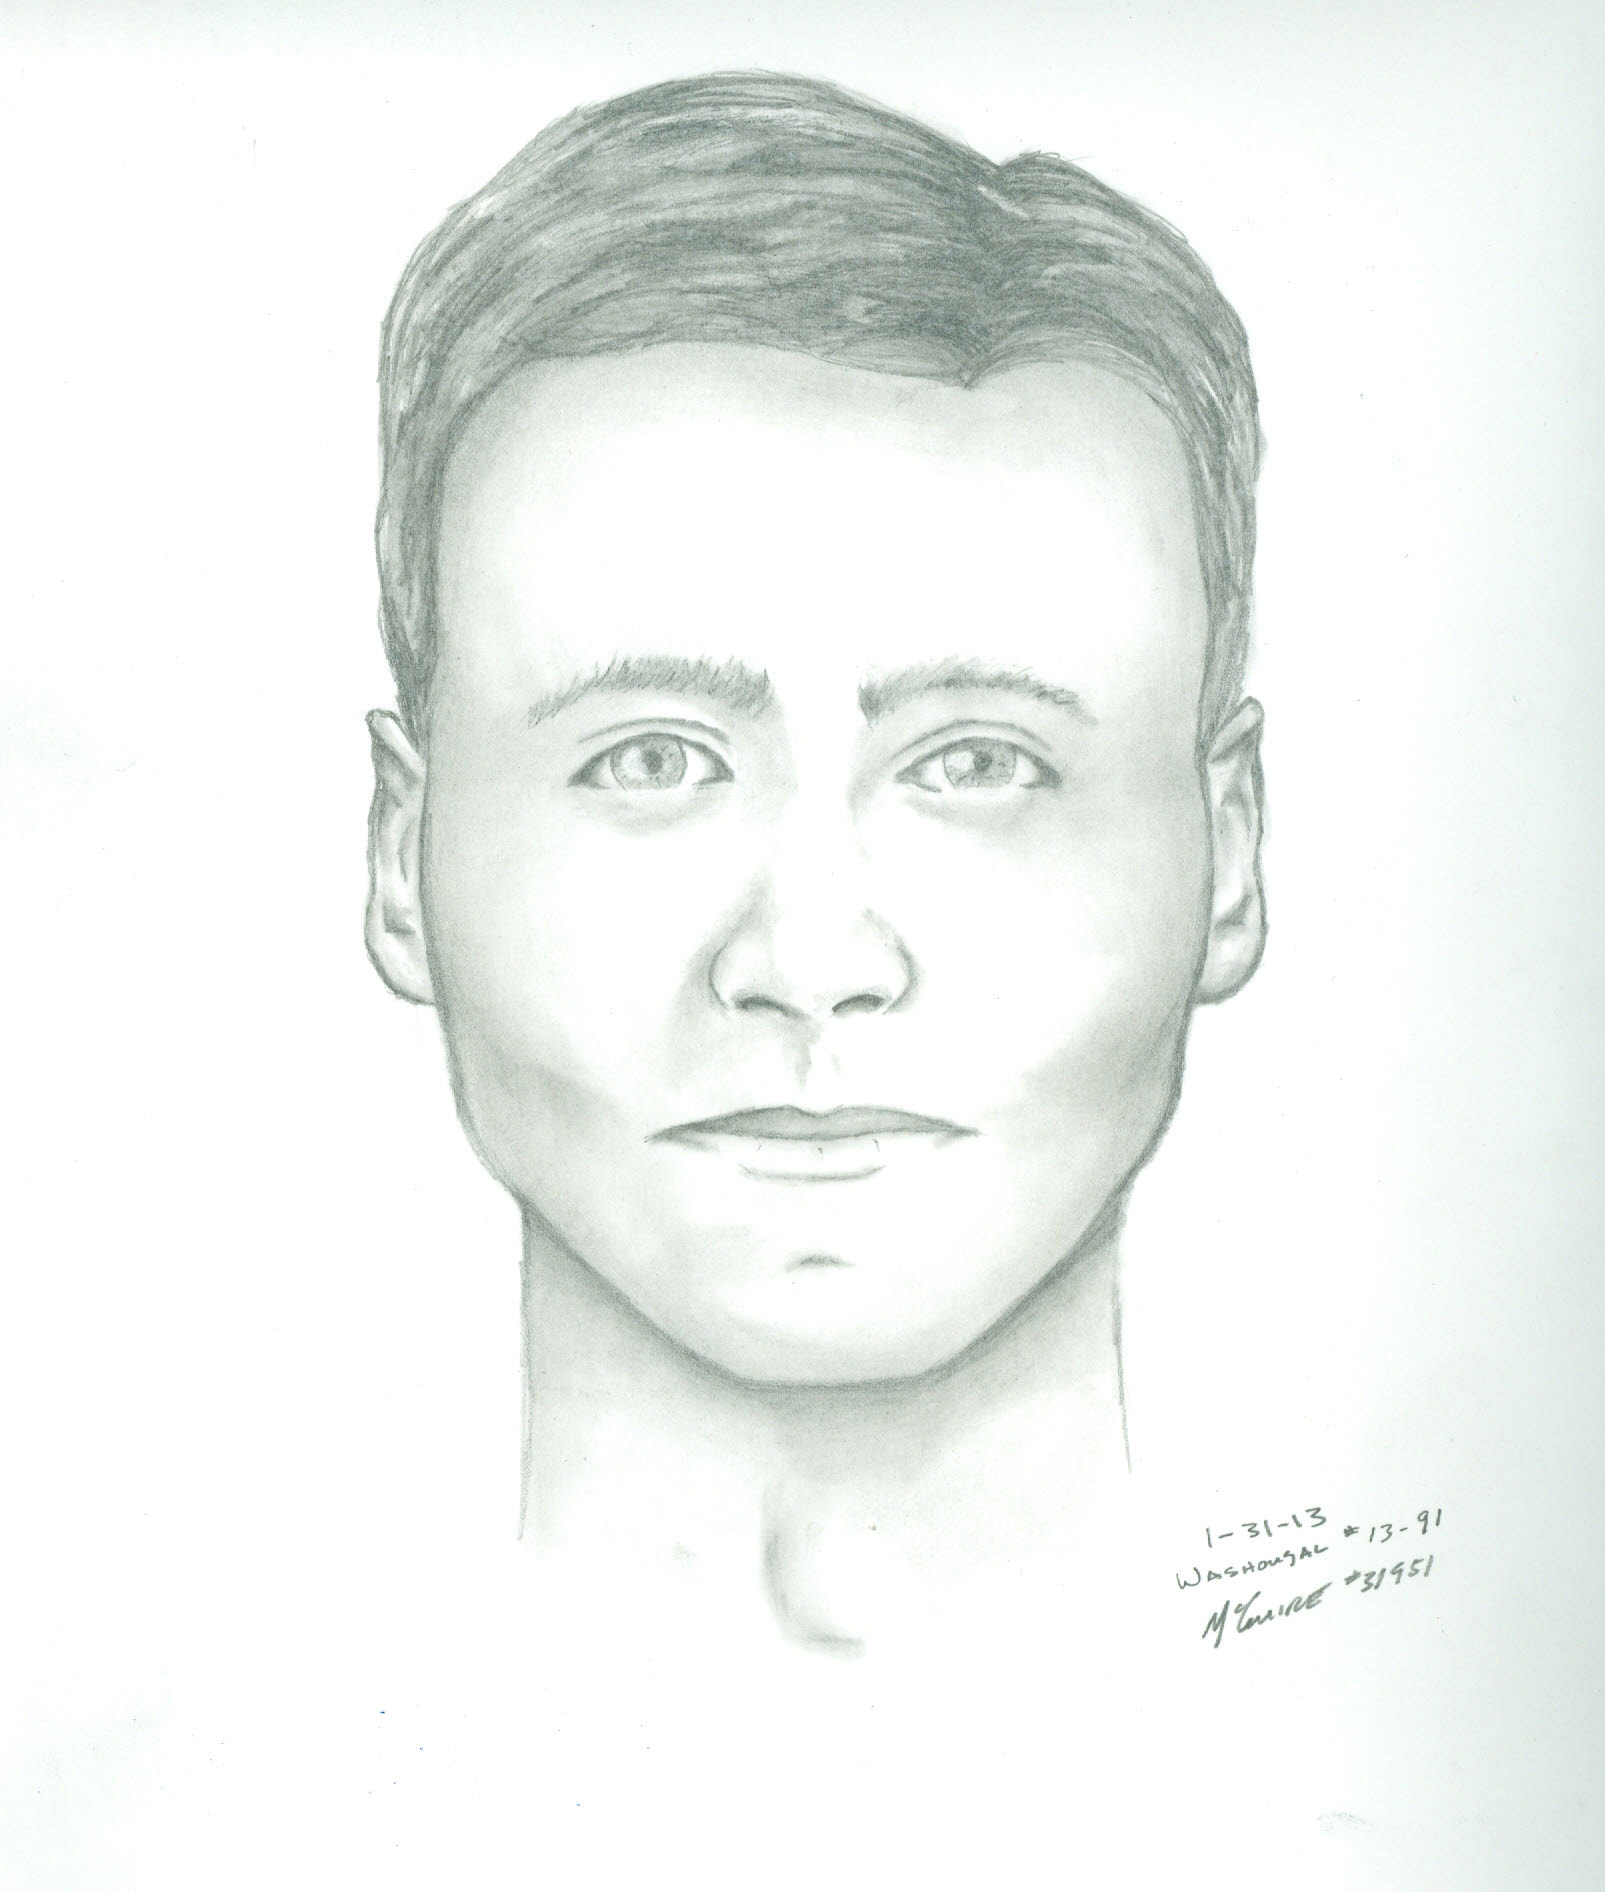 The Washougal Police Department released this composite sketch of one of the suspects in a home invasion.